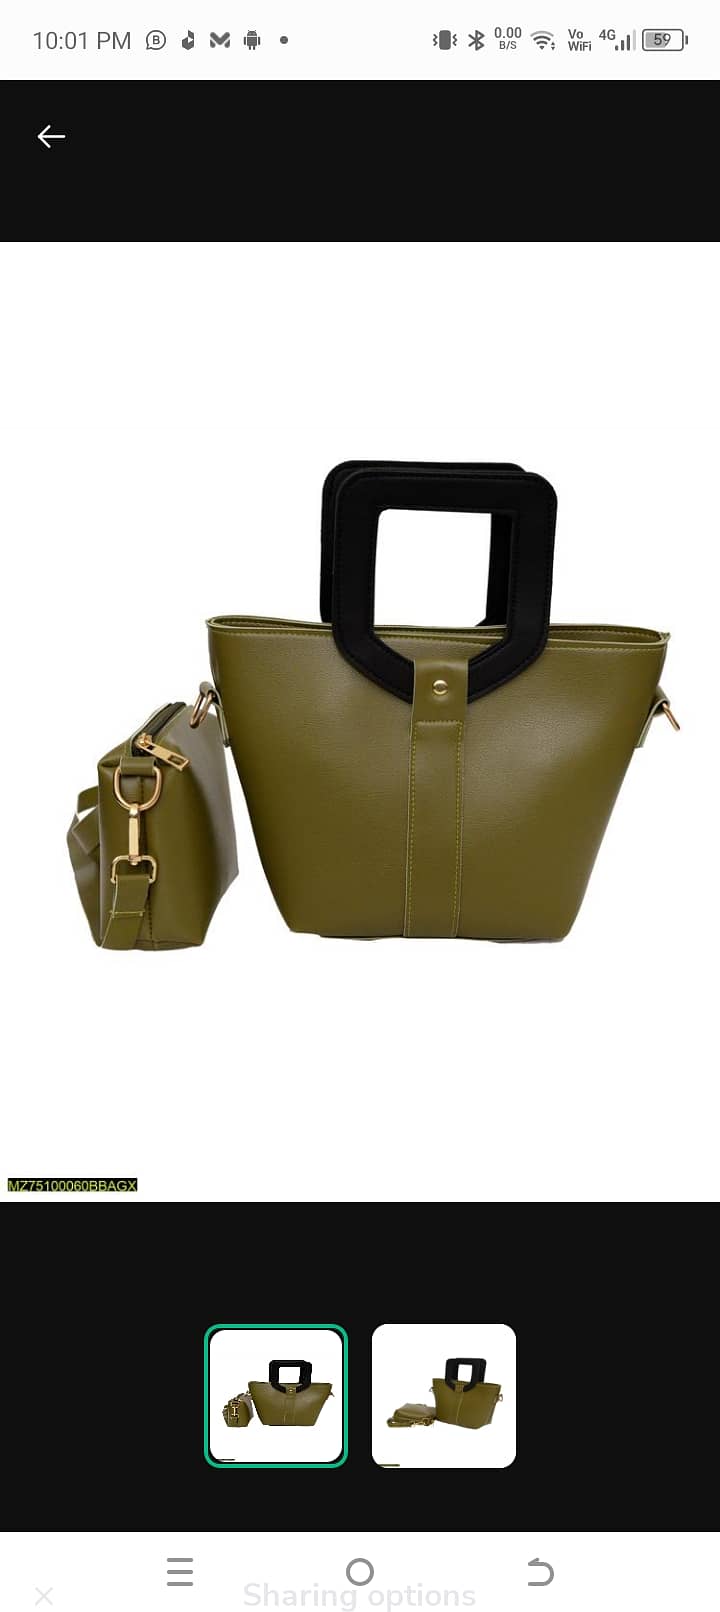 Pure leather bags are available in very cheap prices 18